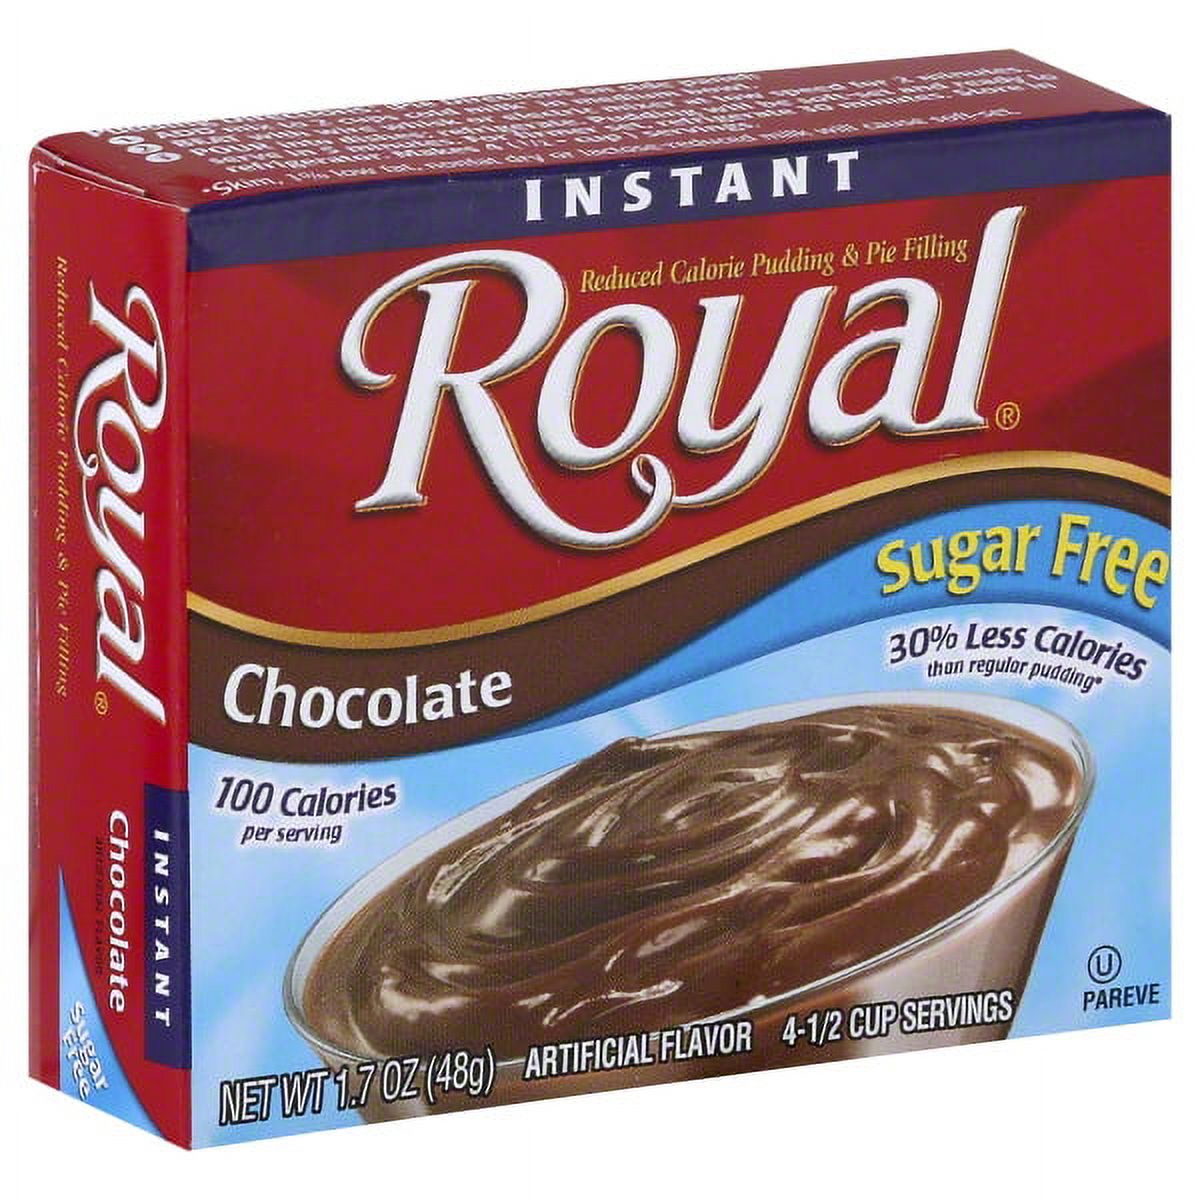 Royal Instant Sugar Free Chocolate Reduced Calorie Pudding & Pie Filling, 1.7 oz - image 1 of 5